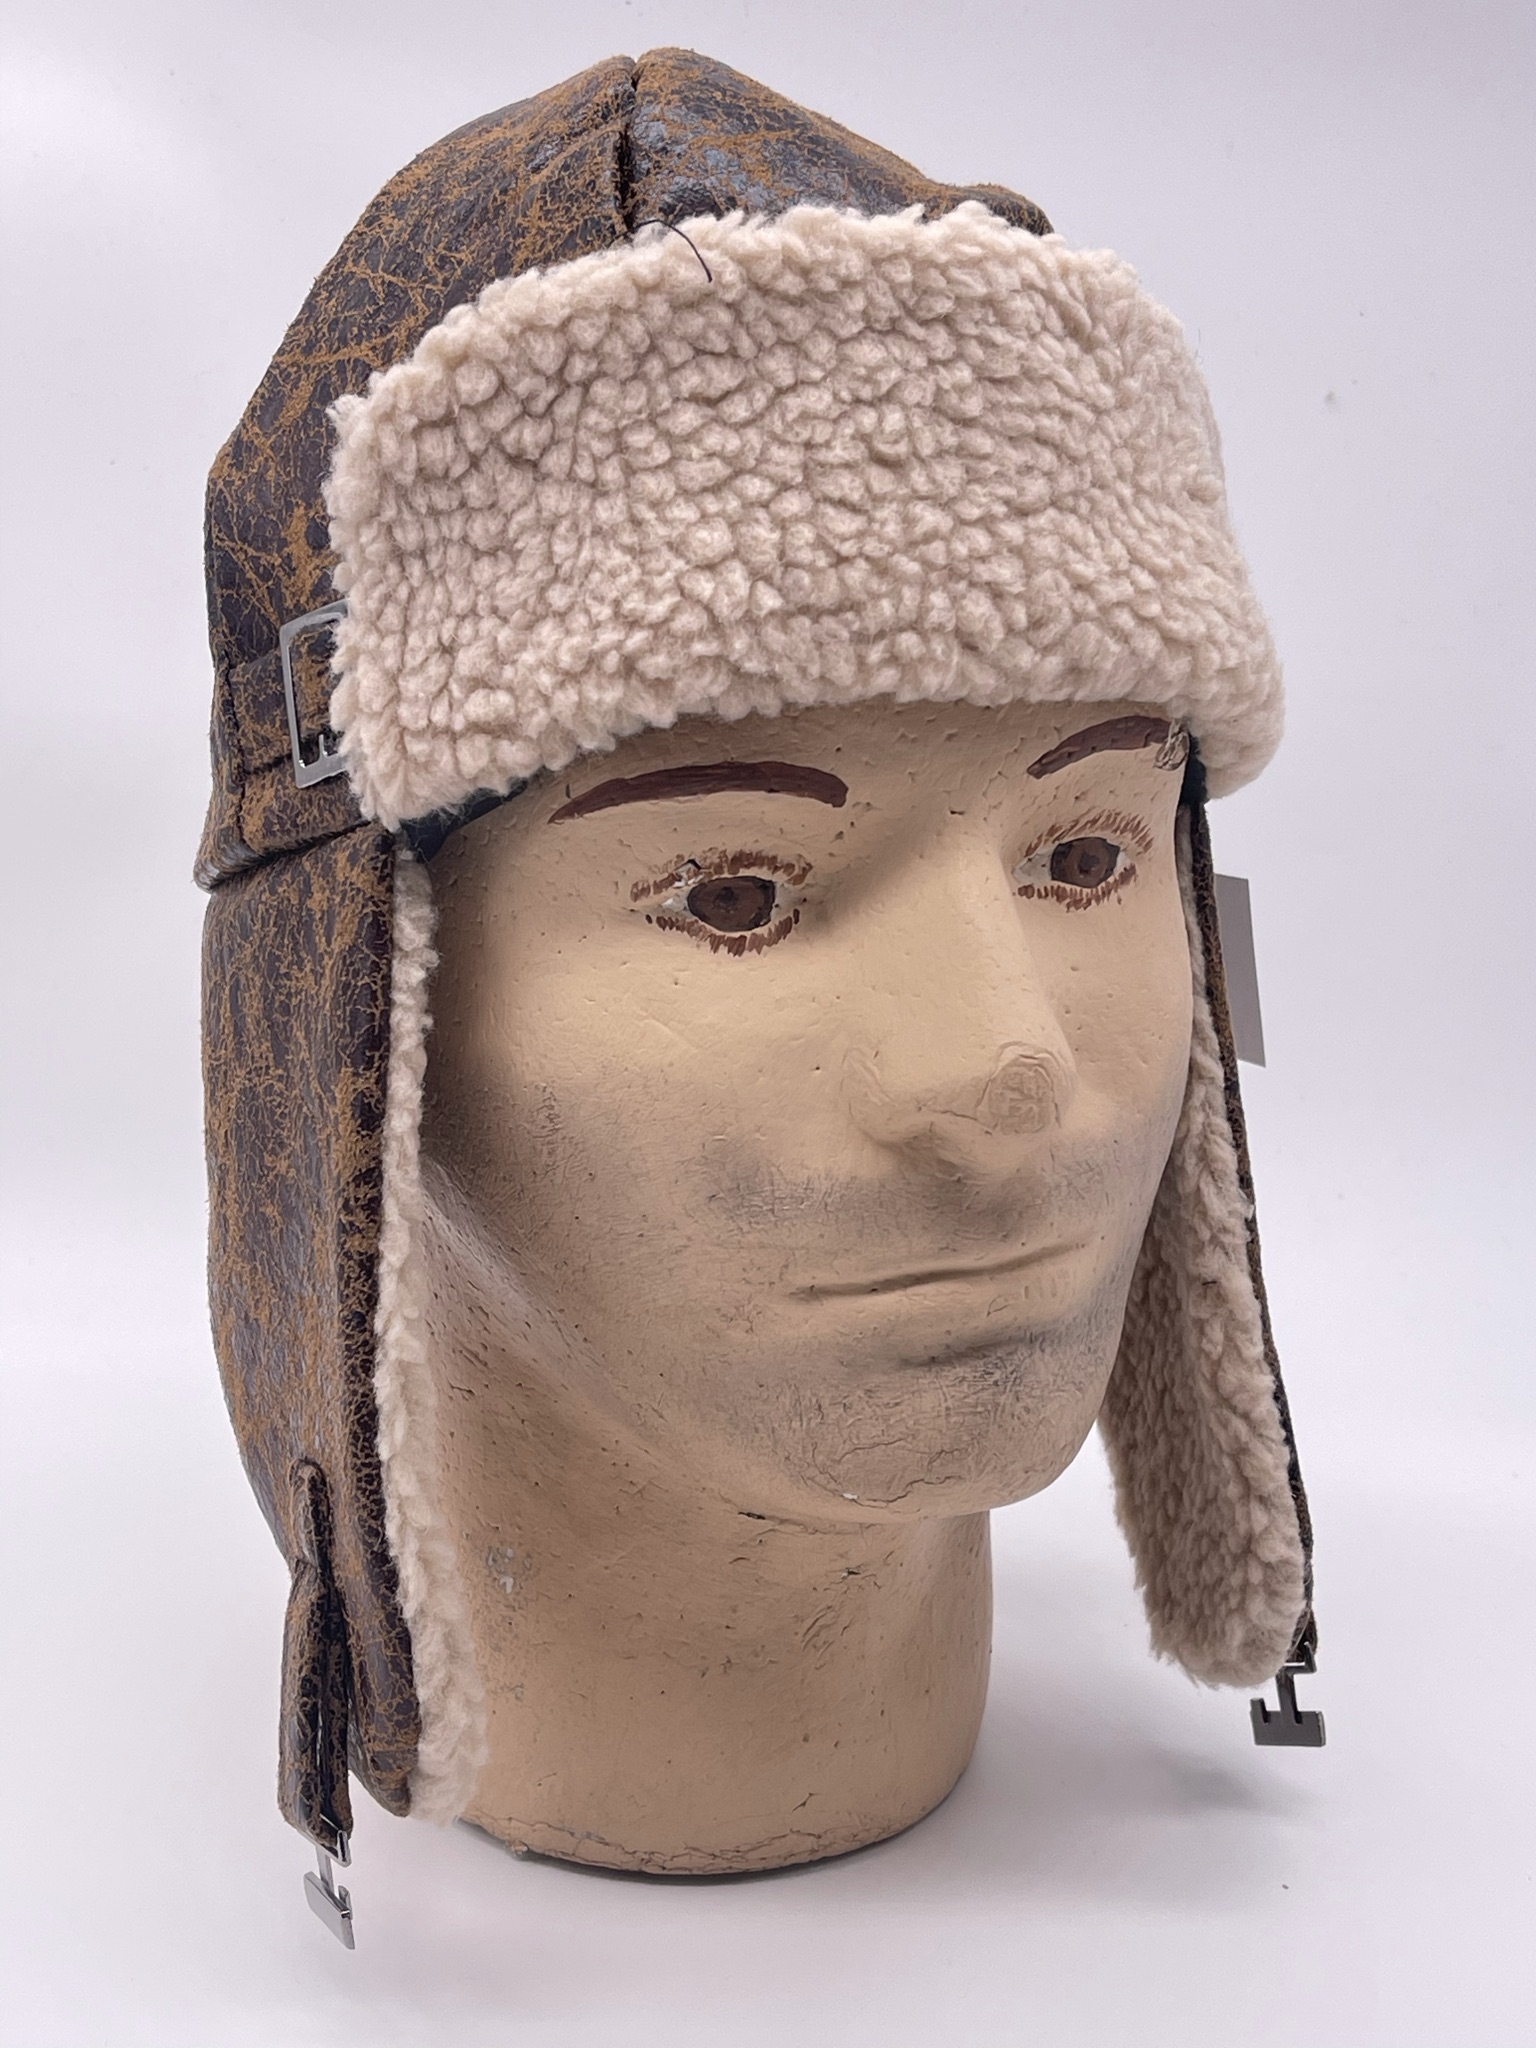 Featured image for “Aviator hat”